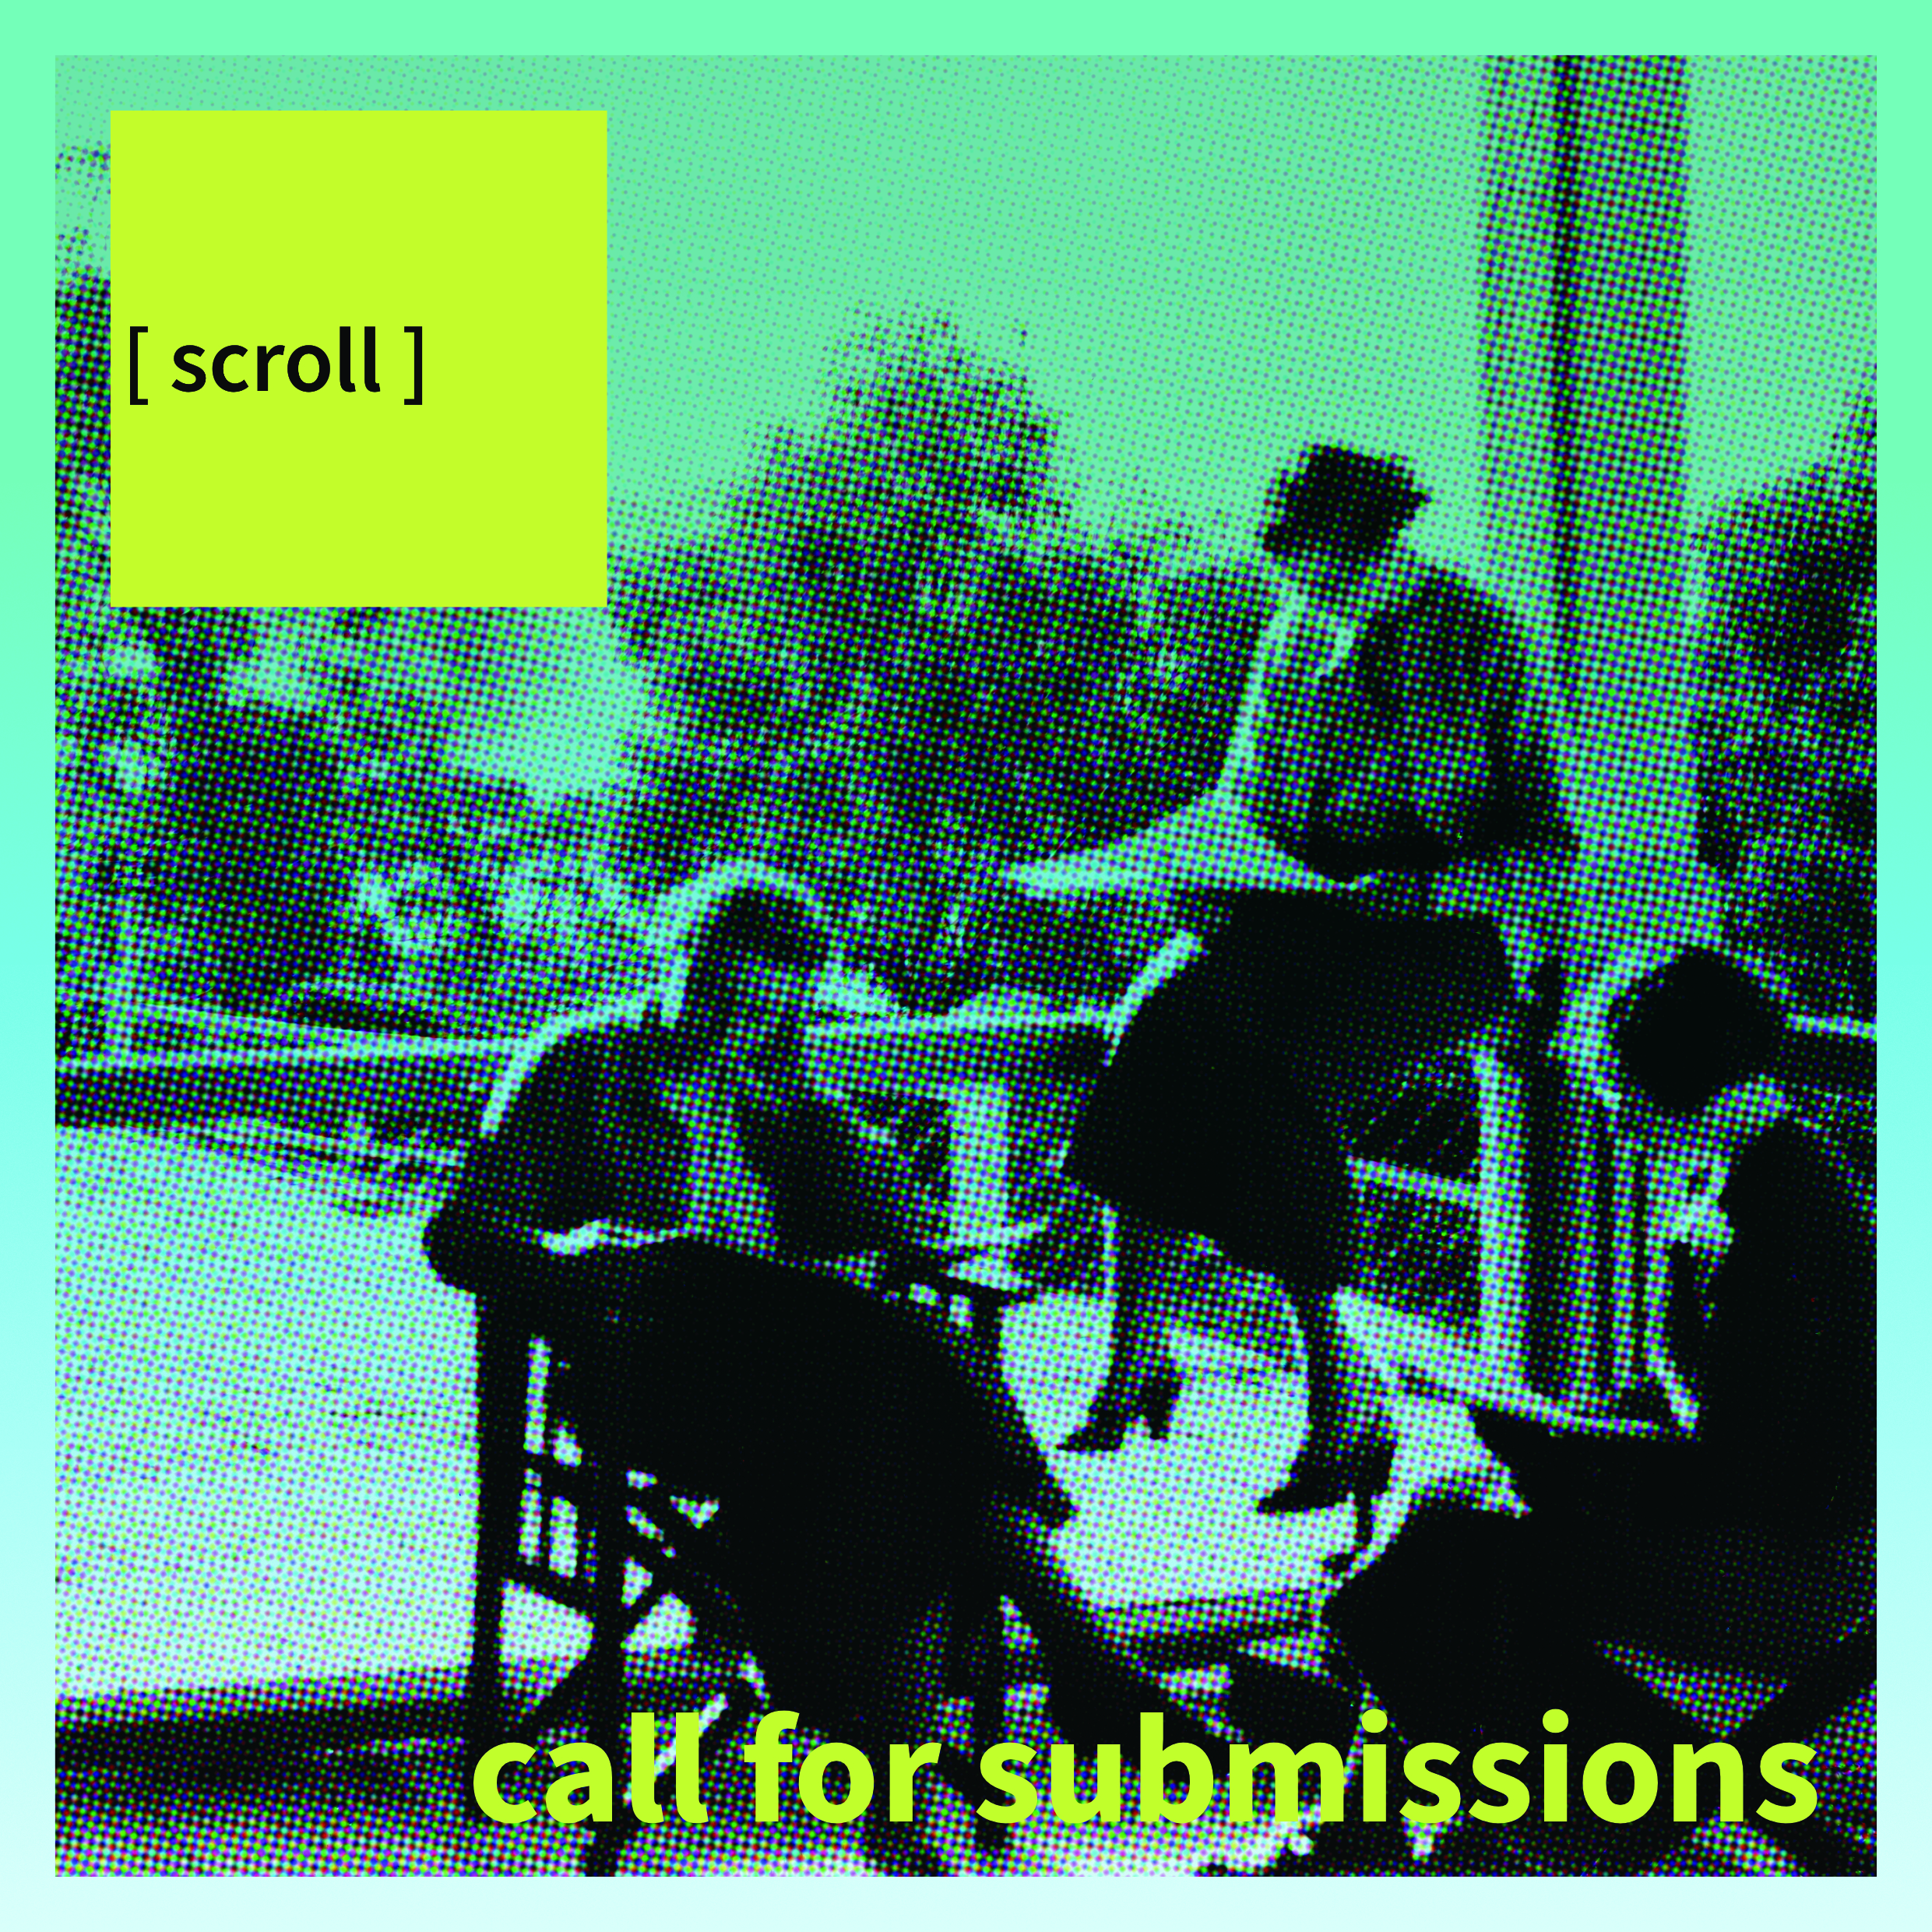 Call for submissions: Submissions for Scroll Volume 4 are now open.